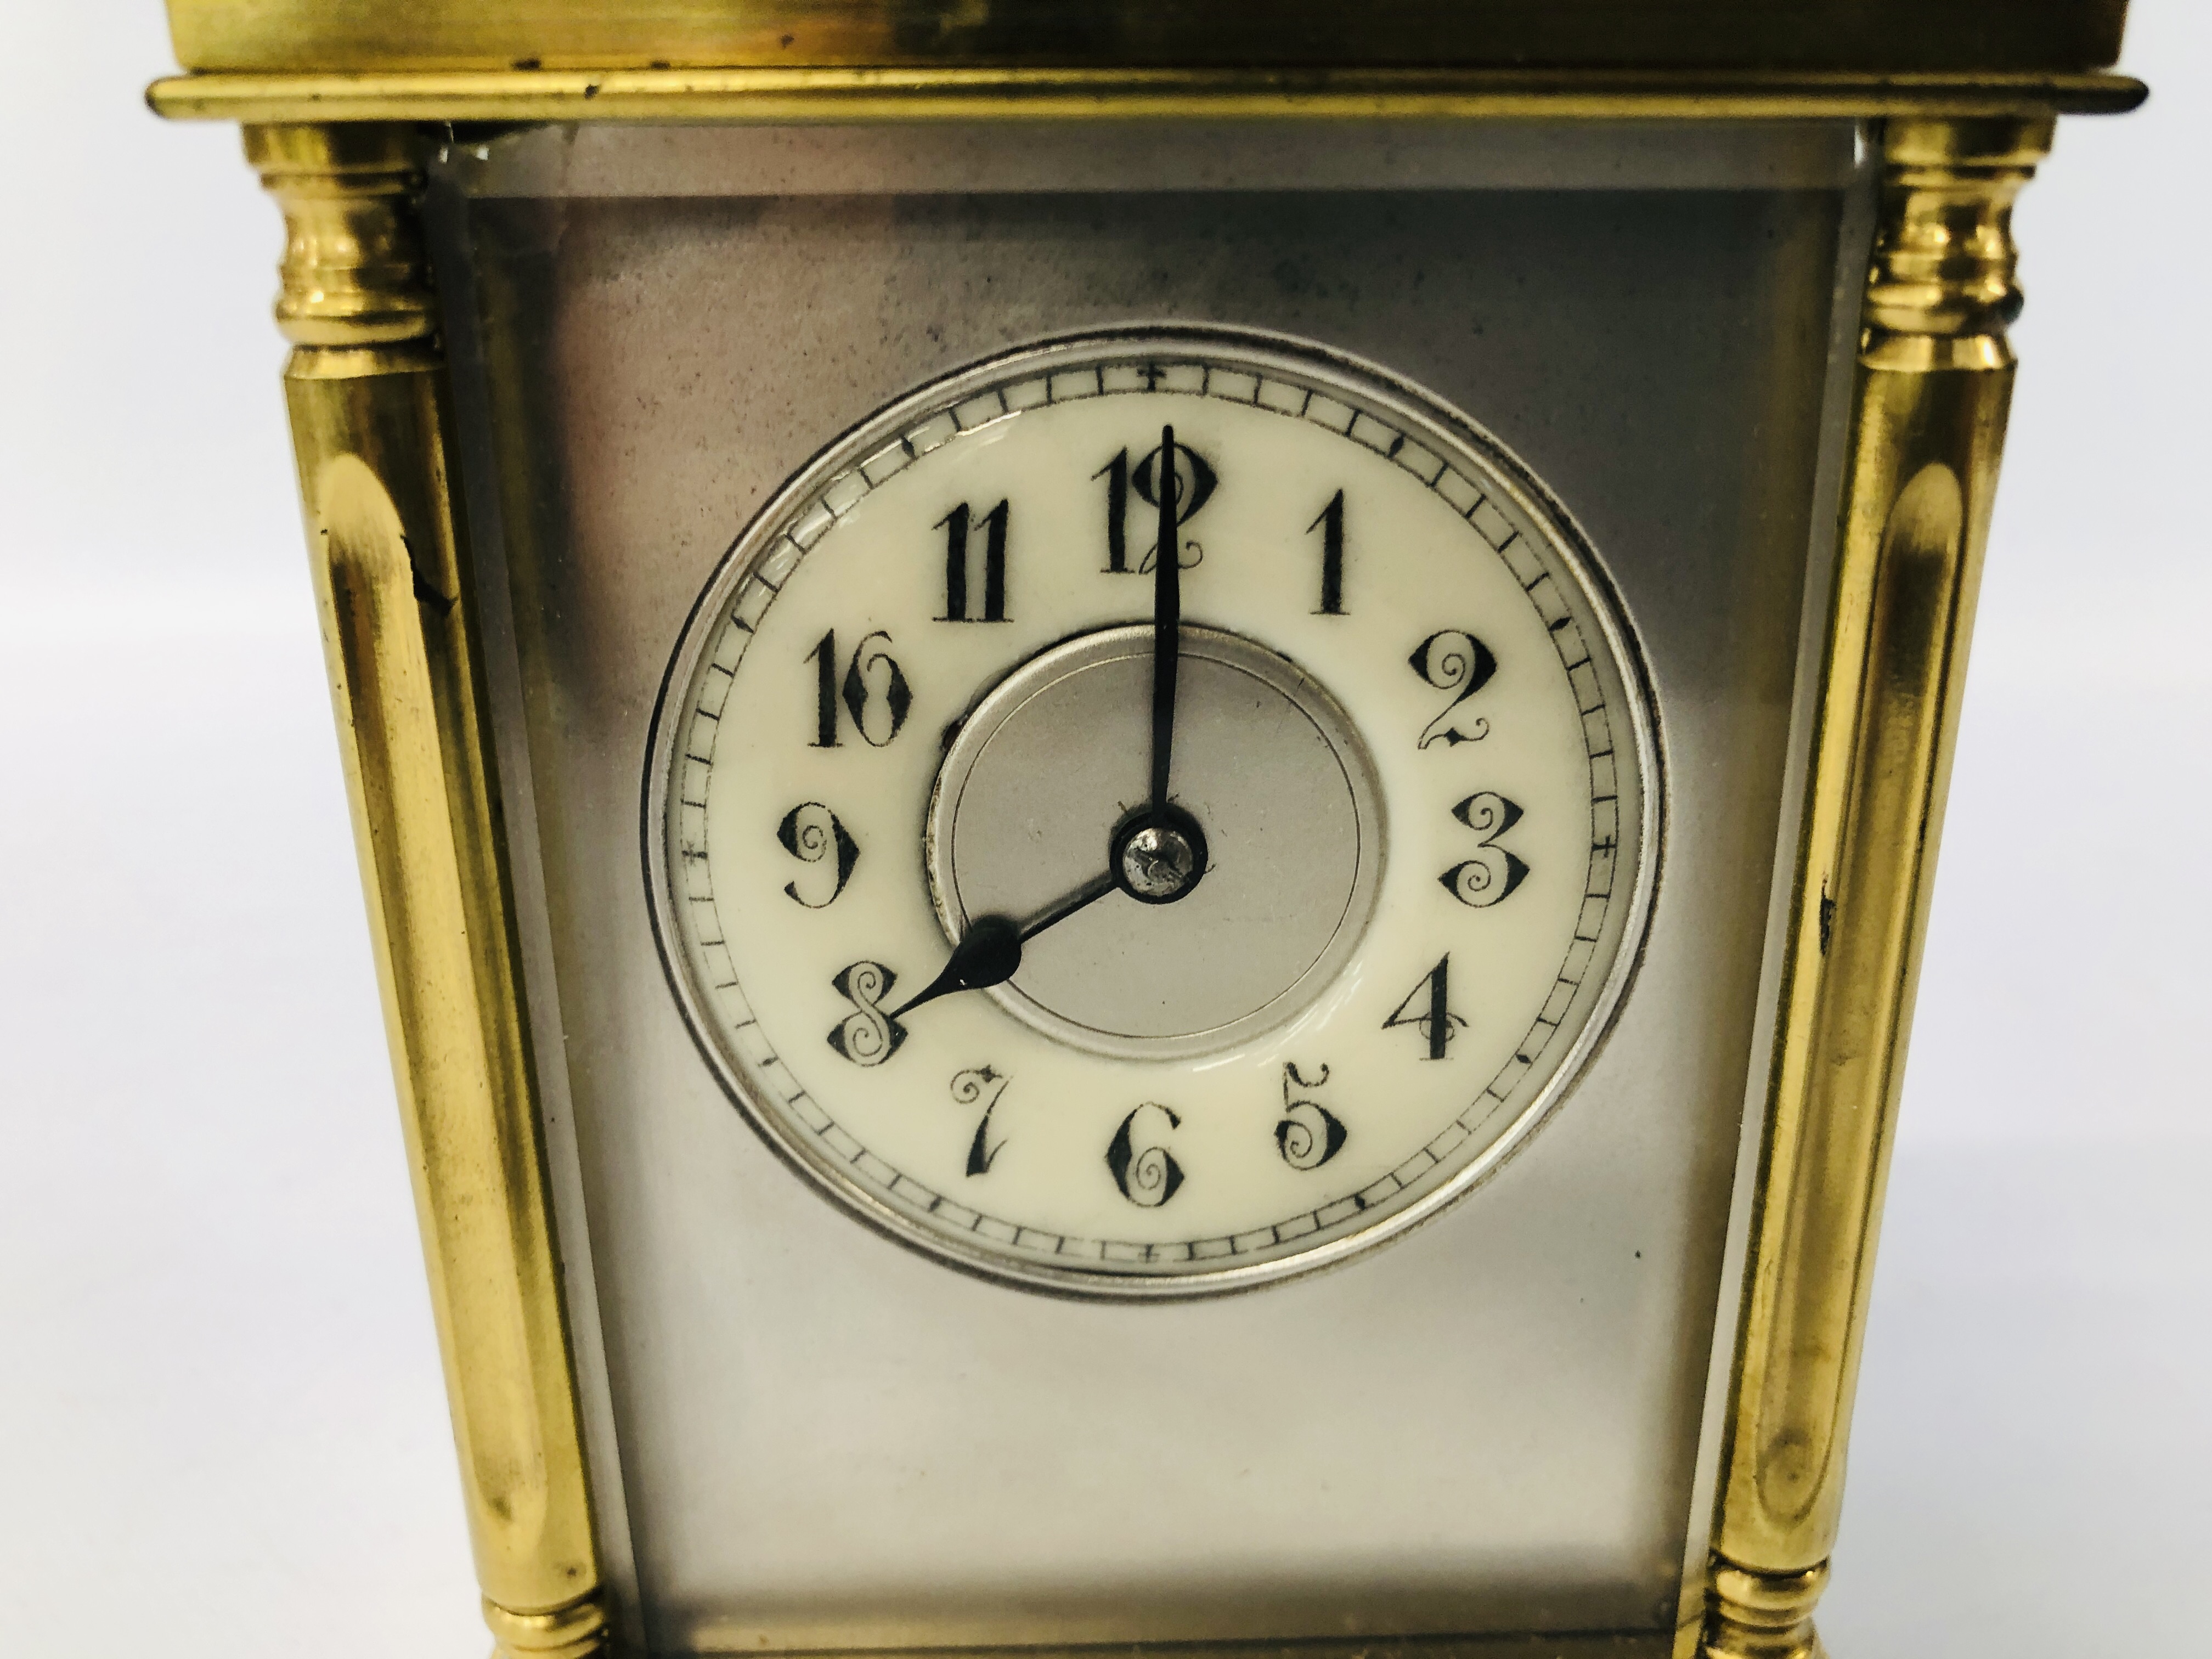 ANTIQUE BRASS CARRIDGE CLOCK WITH ENAMELLED FACE (REQUIRES ATTENTION TO THE REAR GLASS) H 14CM. - Image 3 of 9